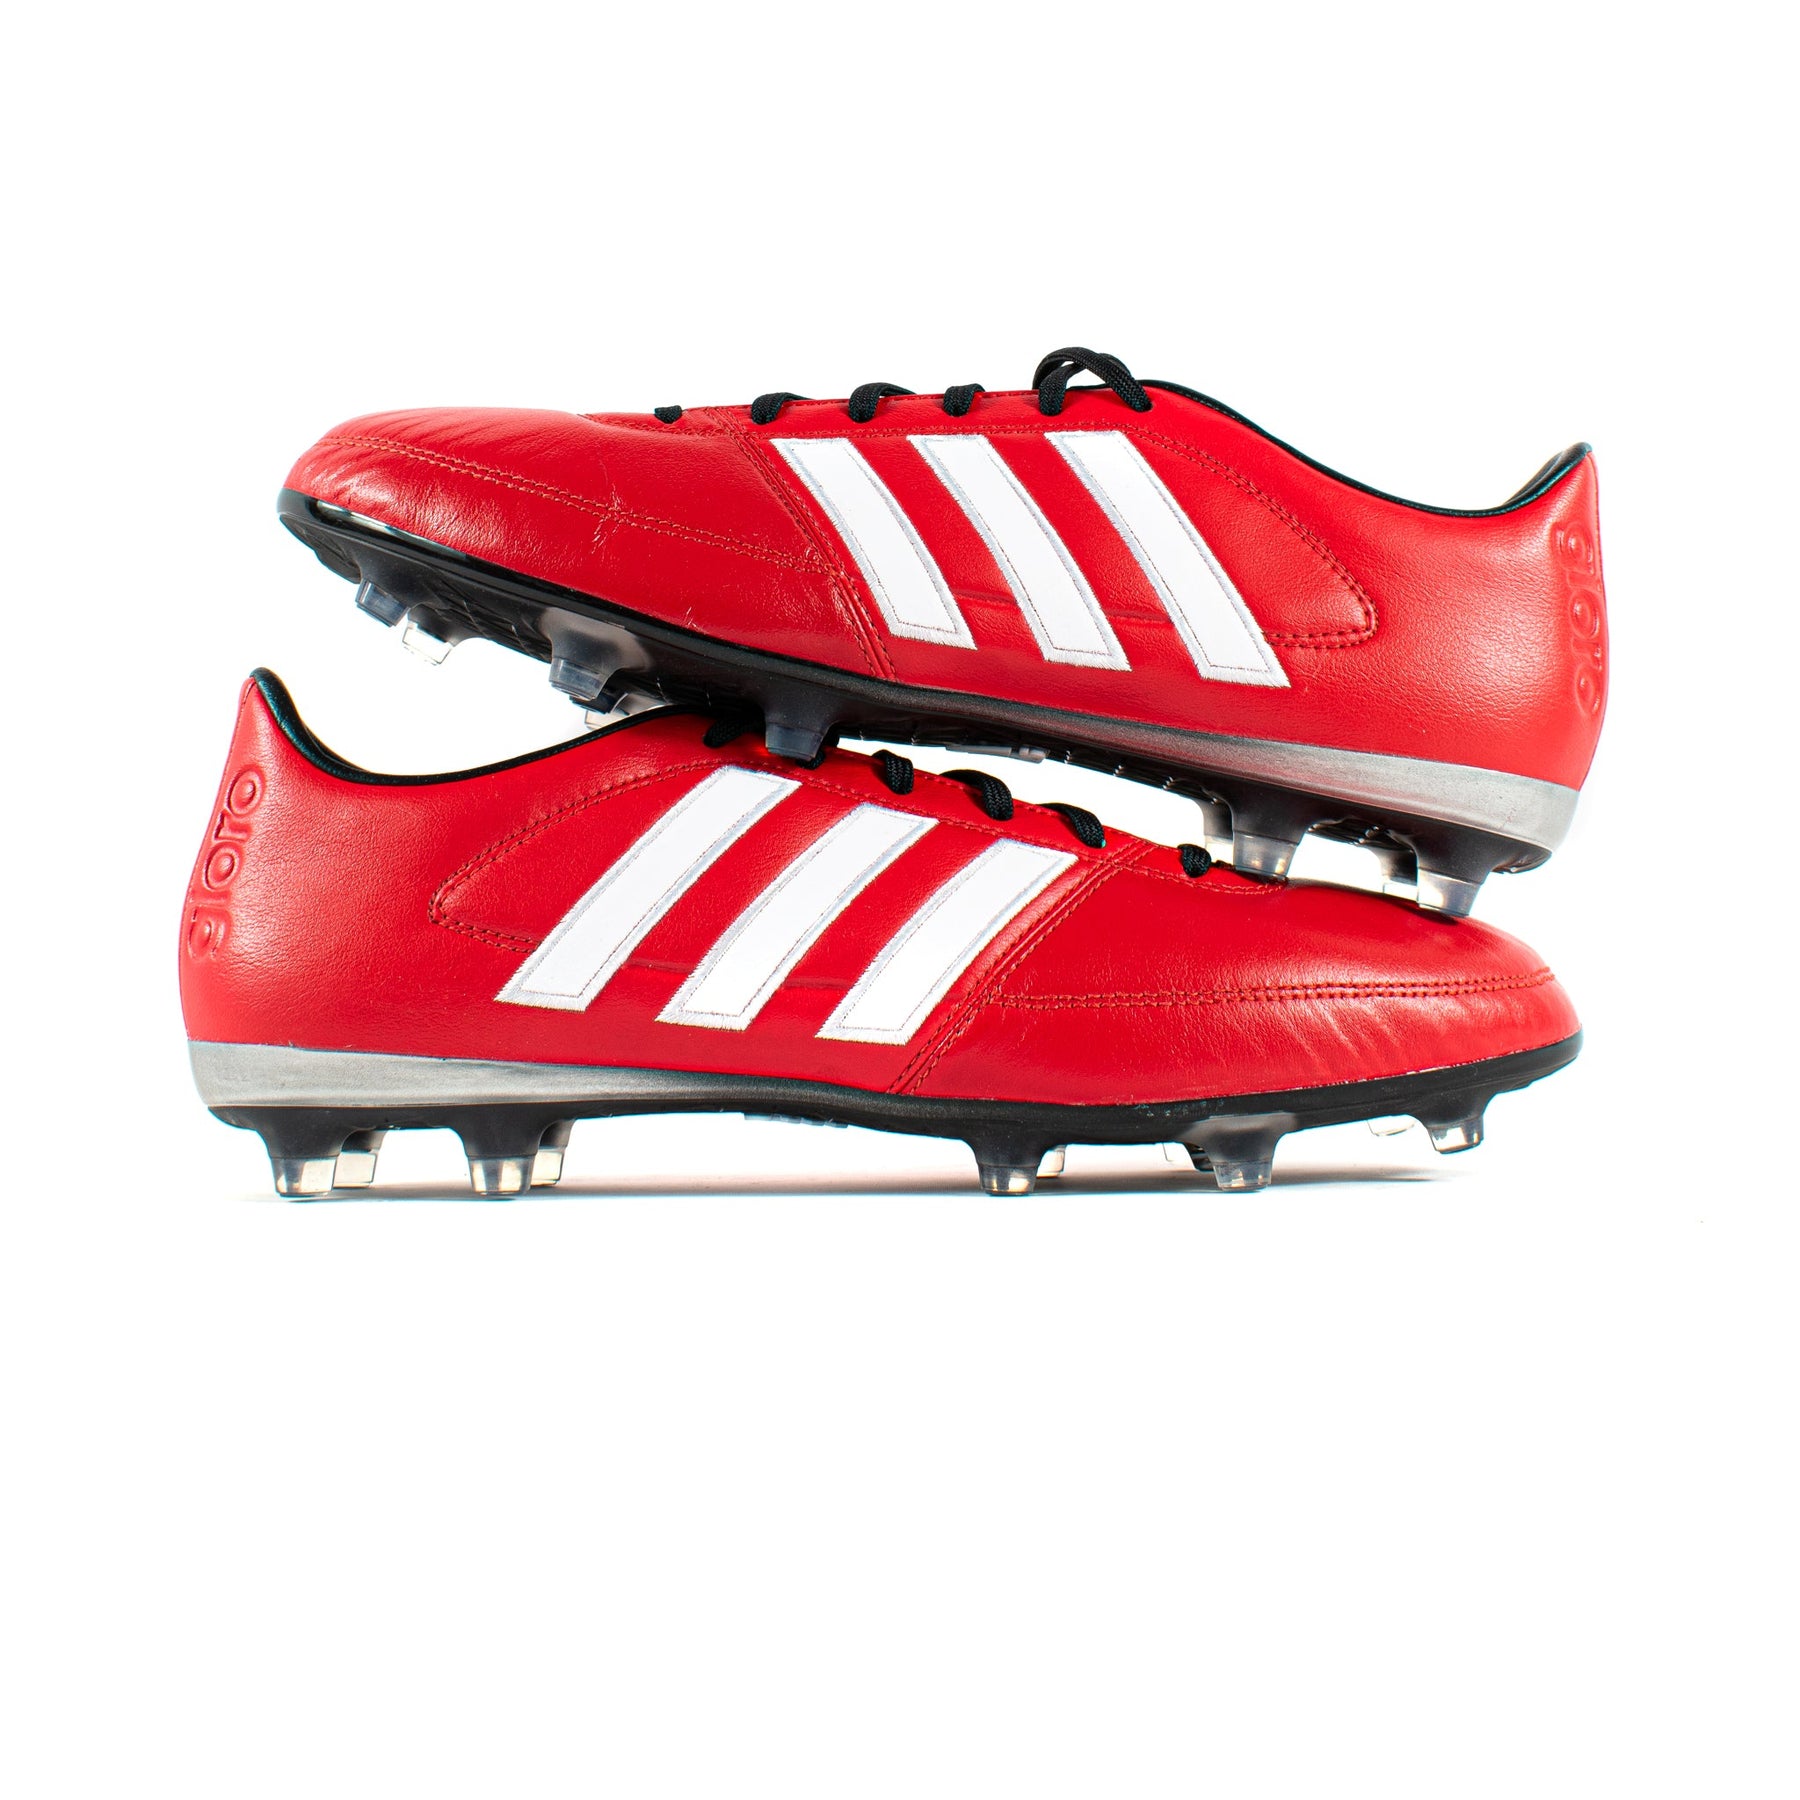 Adidas Copa Gloro 16.1 Red – Classic Soccer Cleats